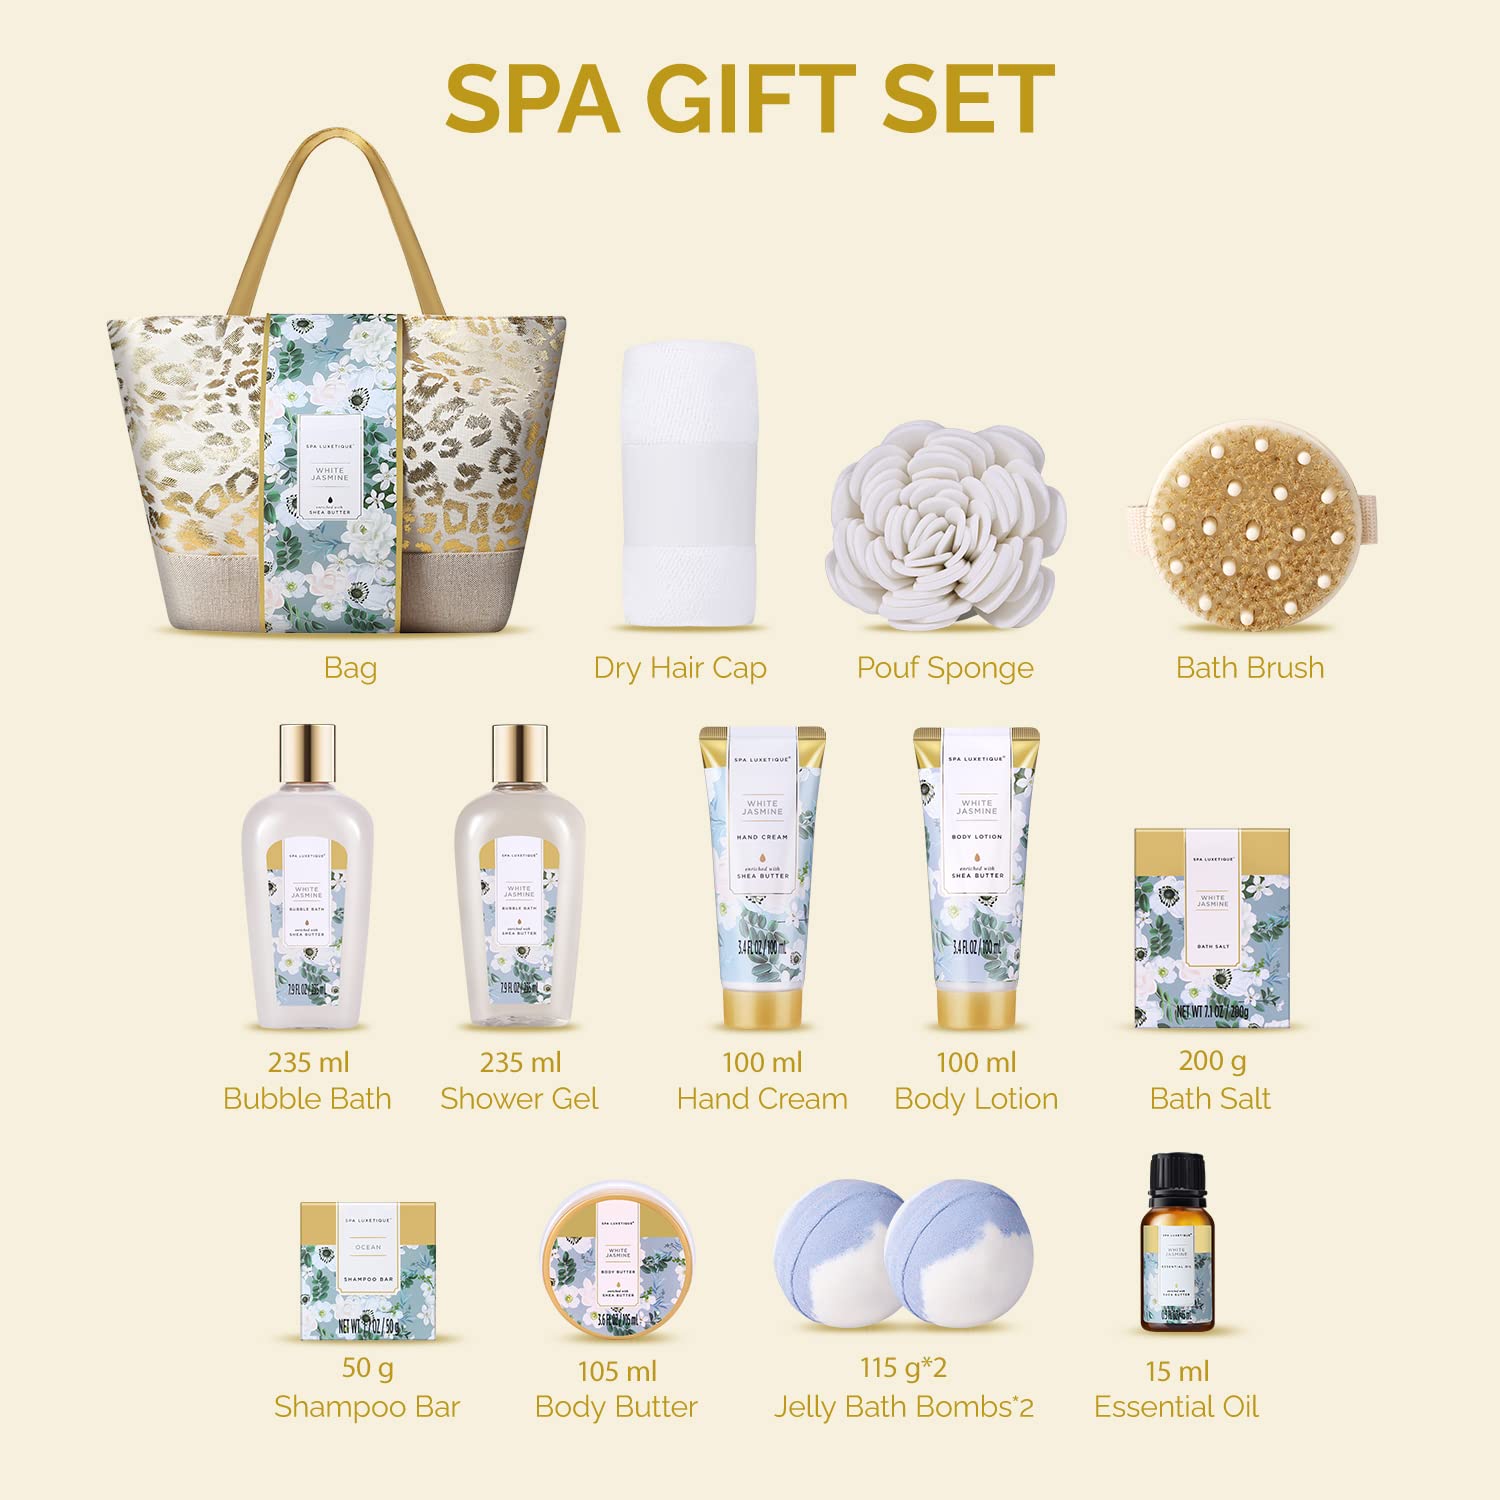 Spa Gift Baskets for Women, Spa Luxetique Gifts for Women, 15pcs Luxury Relaxing Spa Gift Set Includes Bath Bombs, Essential Oil, Hand Cream, Bath Salt and Luxury Tote Bag, Birthday Gifts For Women